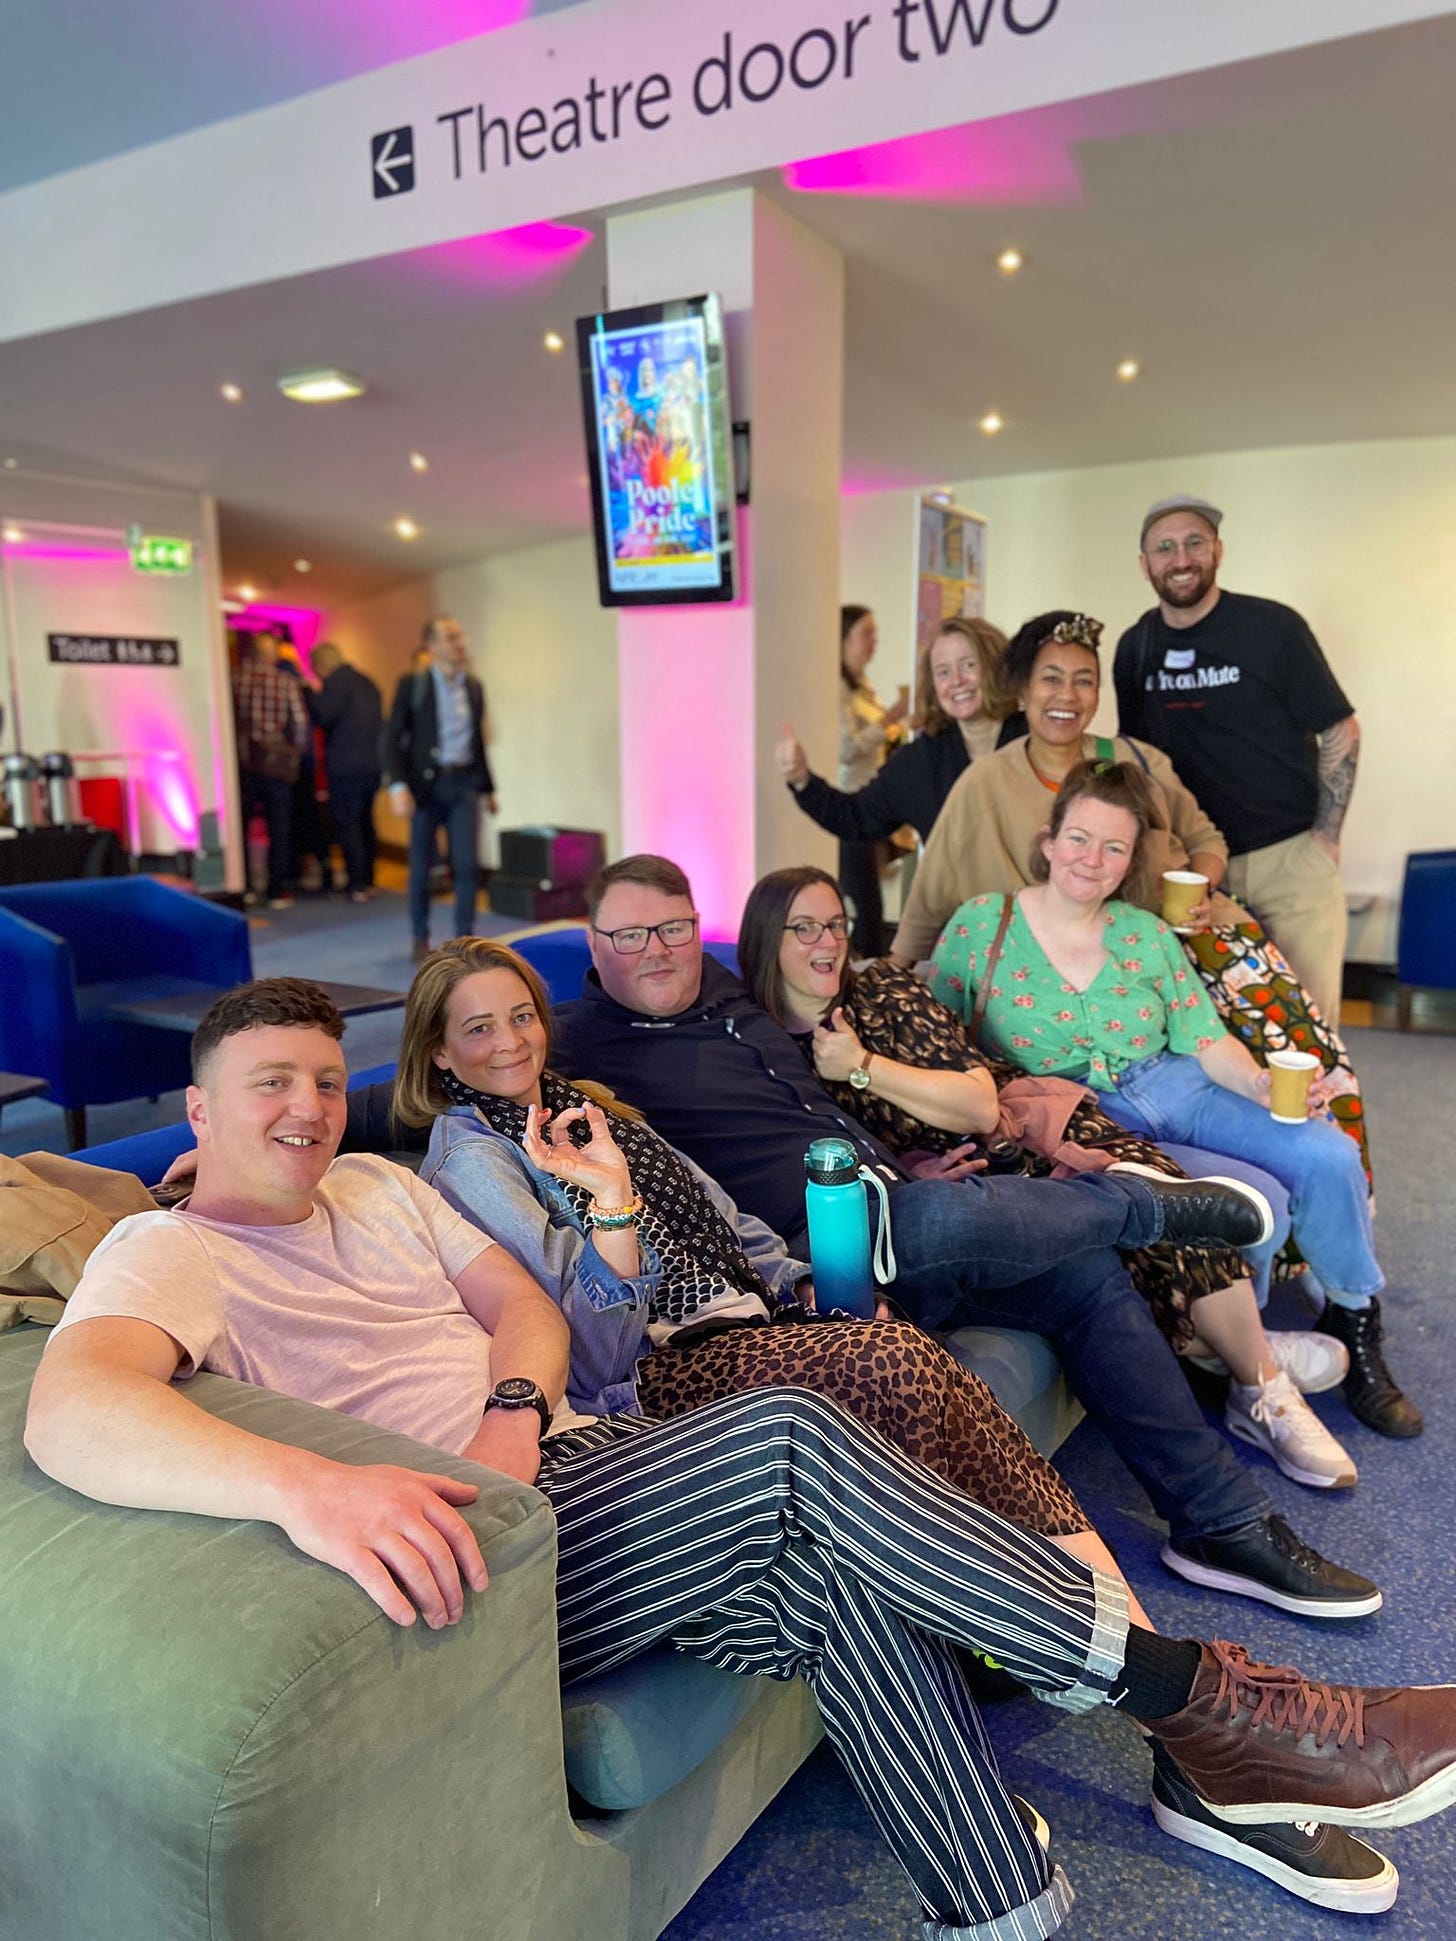 Ben McKinney, Sophie Cross, Dave Harland, Mel Barfield, Molly Scanlan, Ange Lyons, Amy Nolan and Daniel Plume on and near a sofa